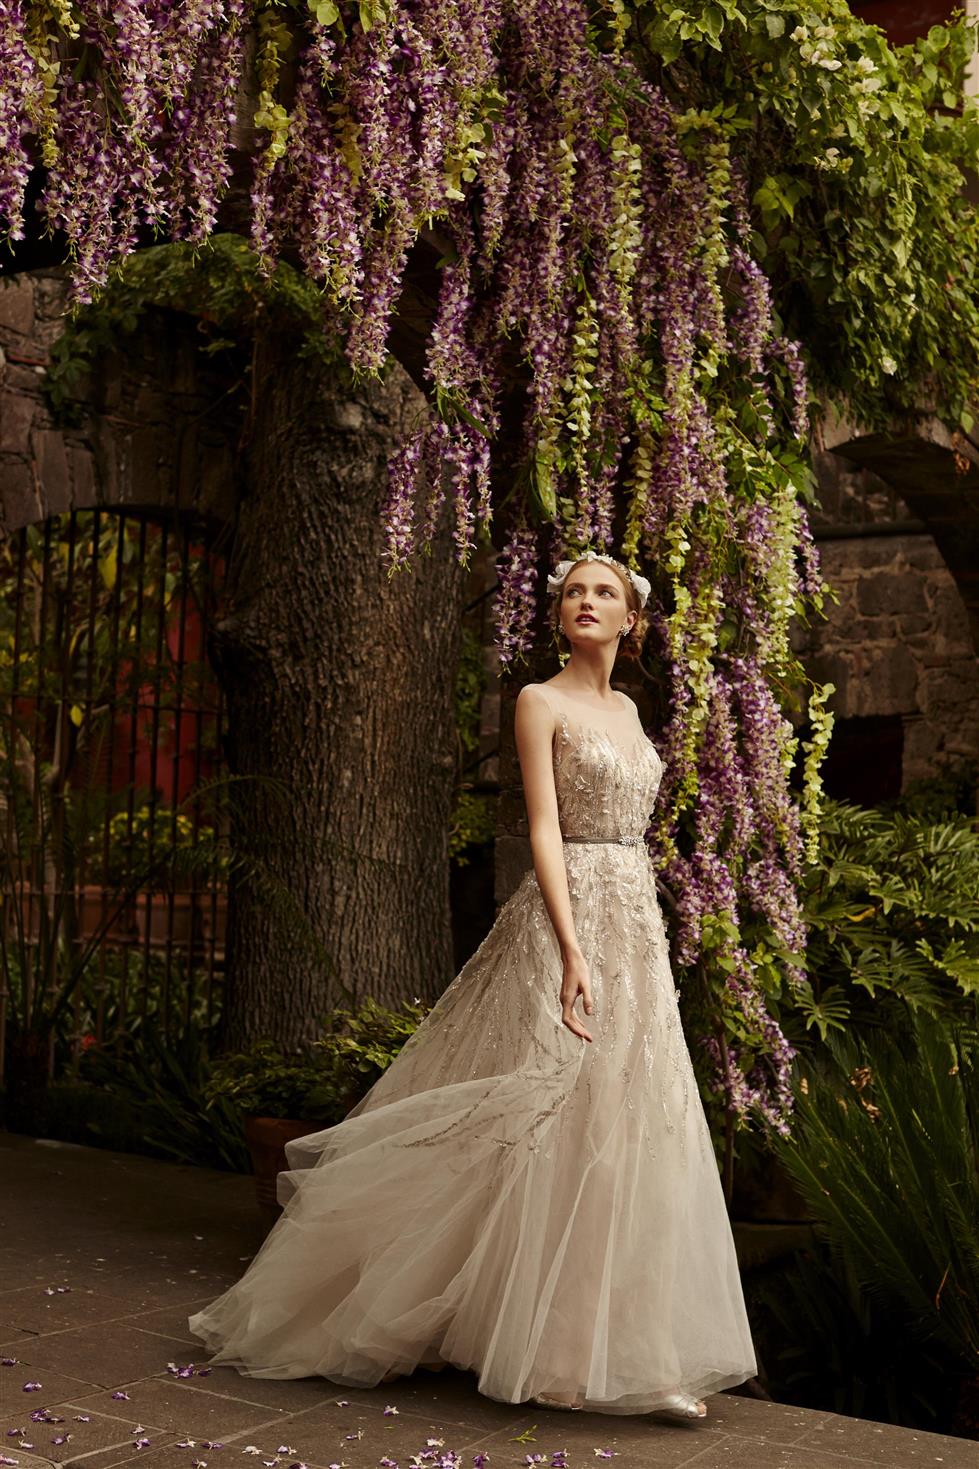 Wisteria Wedding Dress from BHLDN's Spring 2015 Bridal Collection